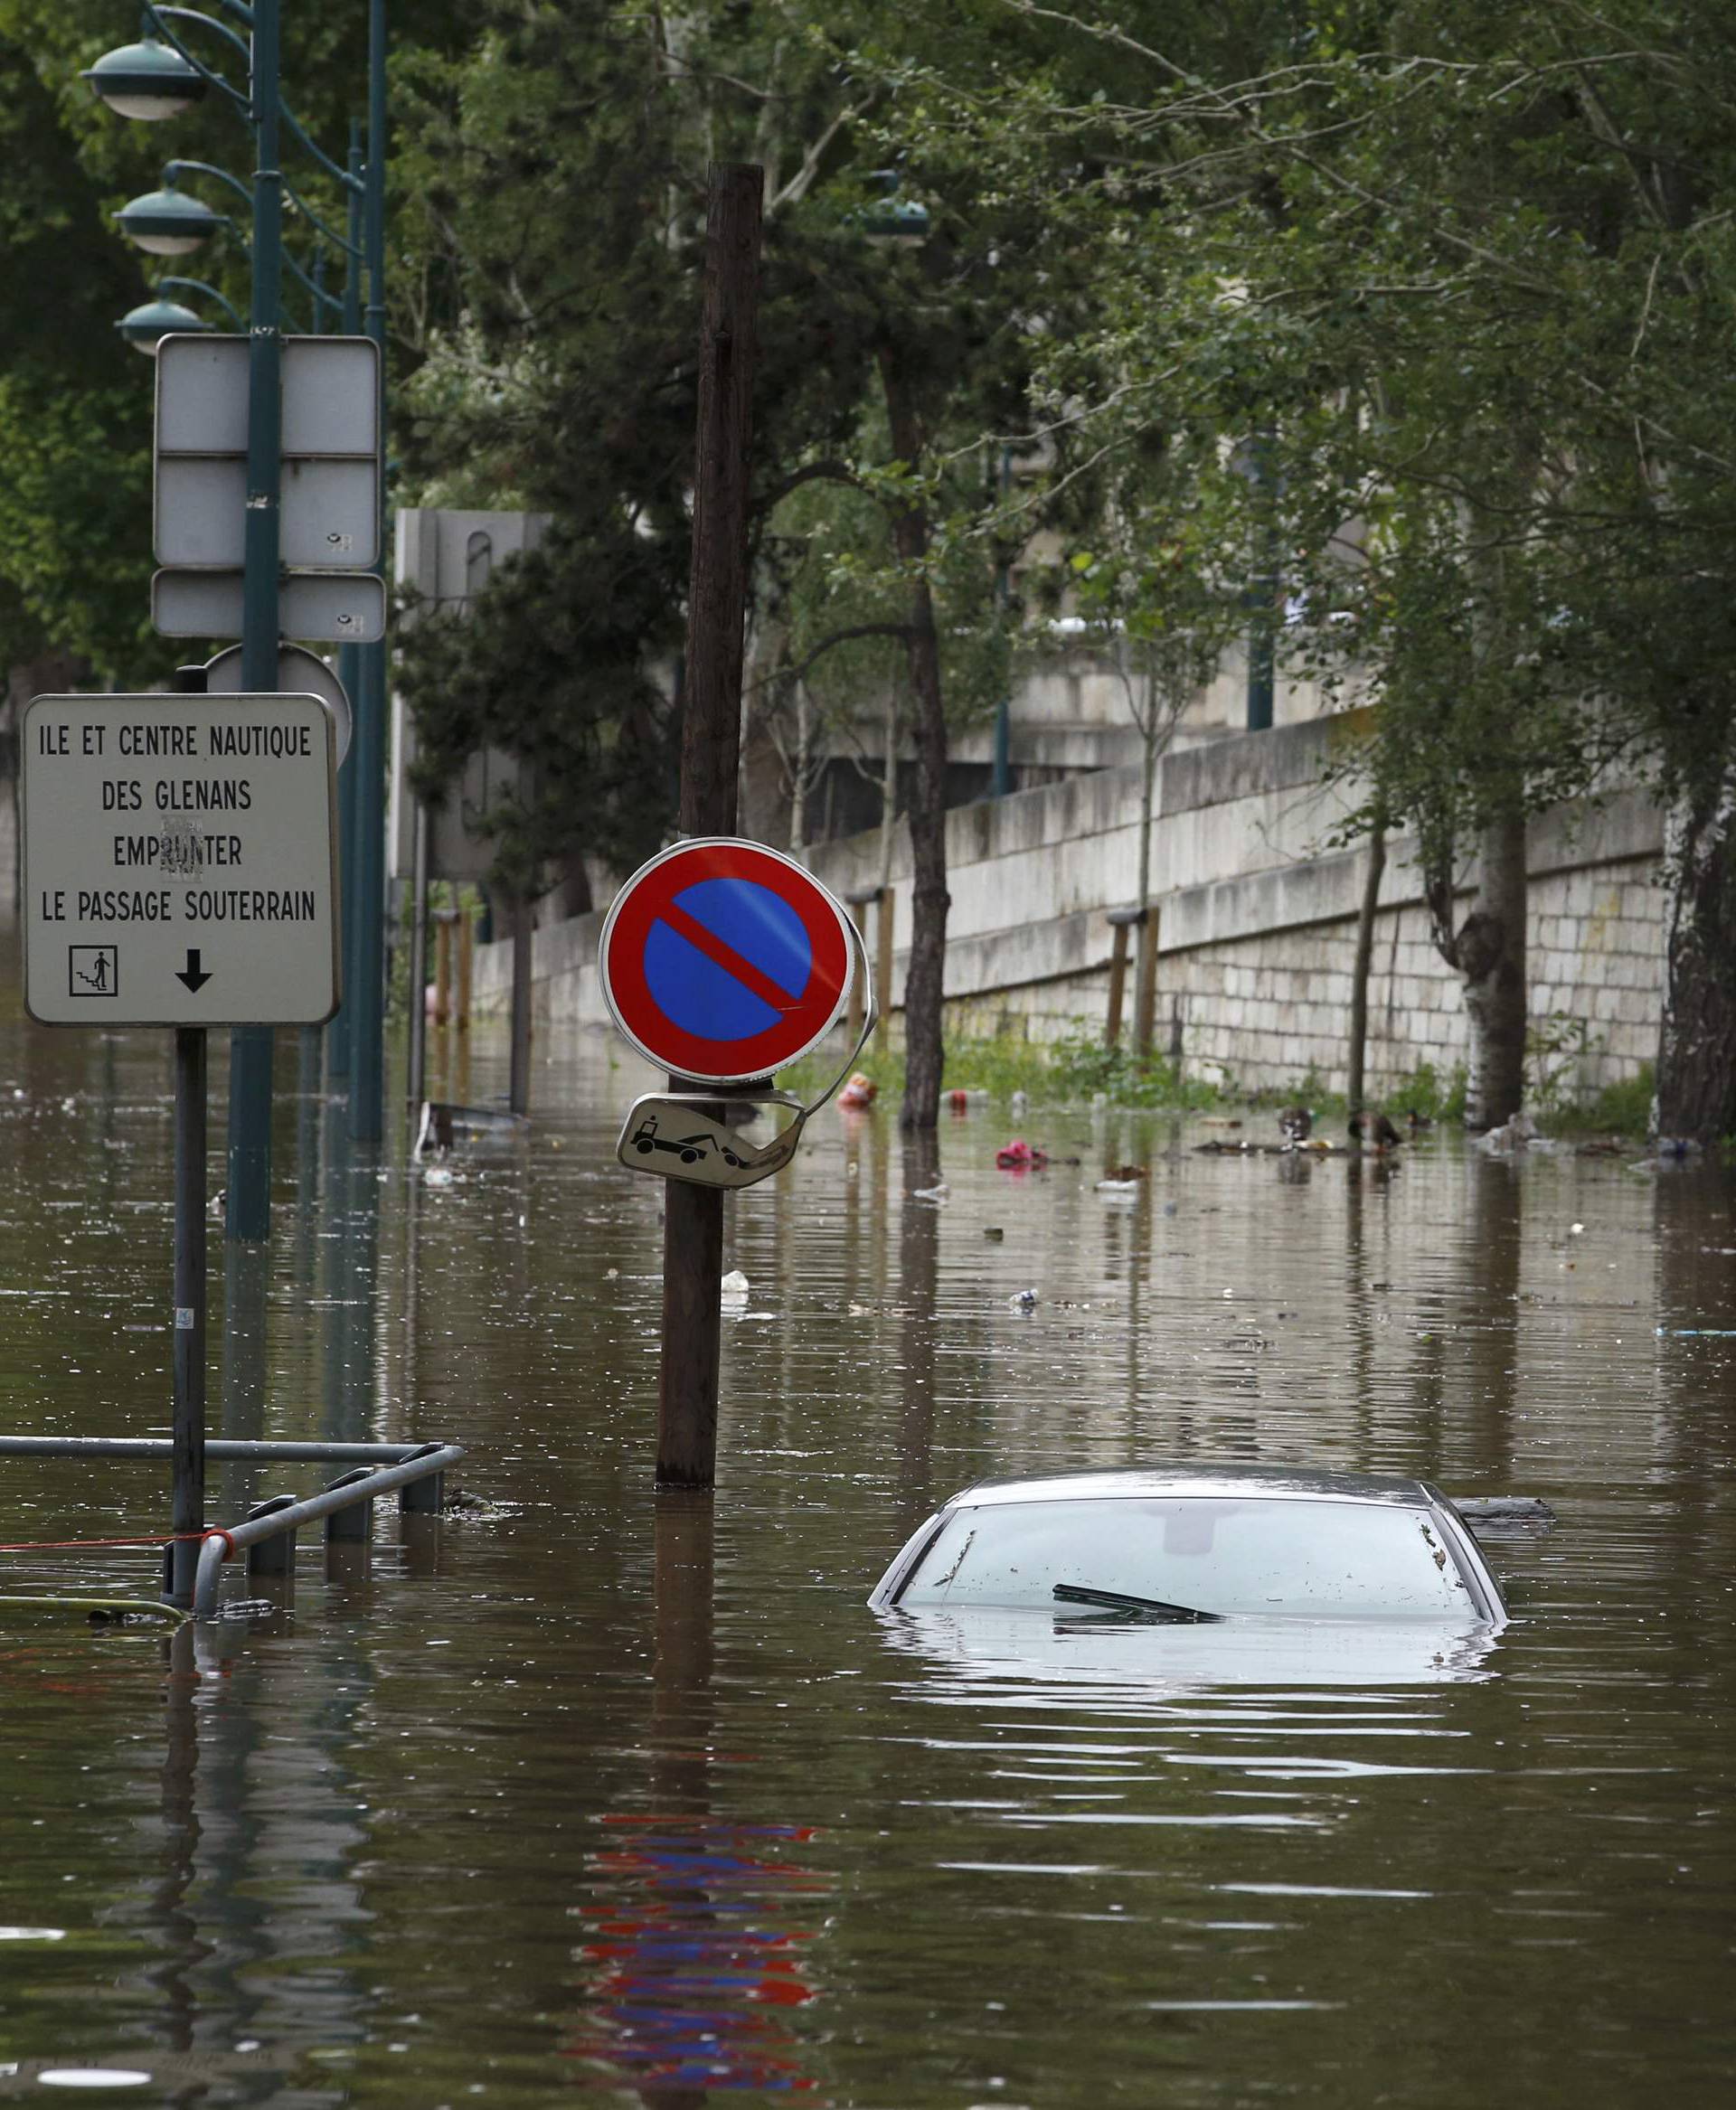 An abandoned car is submerged in deep water on the flooded river-side of the River Seine in Paris